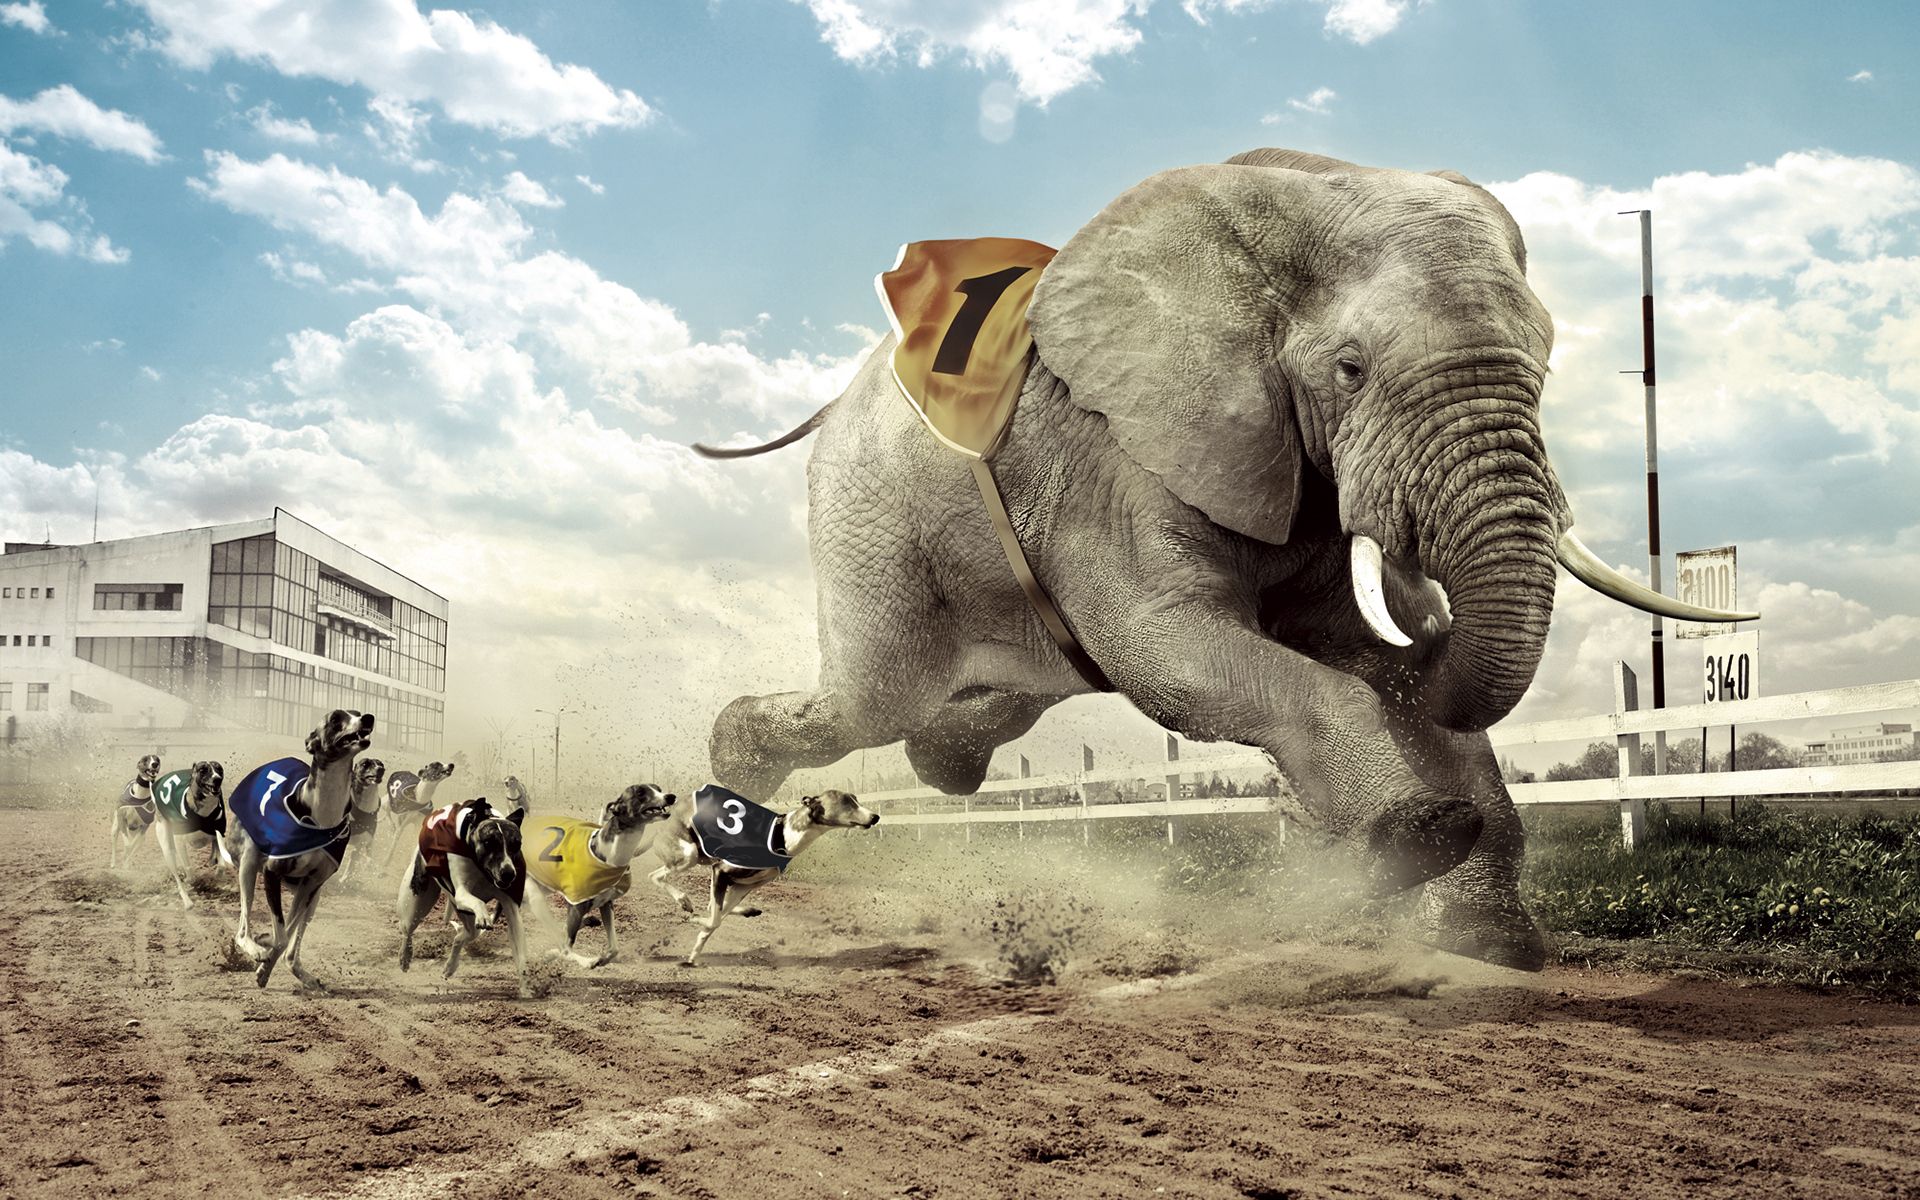 glass, animals, grass, sky, sand, building, lights, dog, lanterns, house, fence, fangs, cloud, track, elephant, heat, race, competition